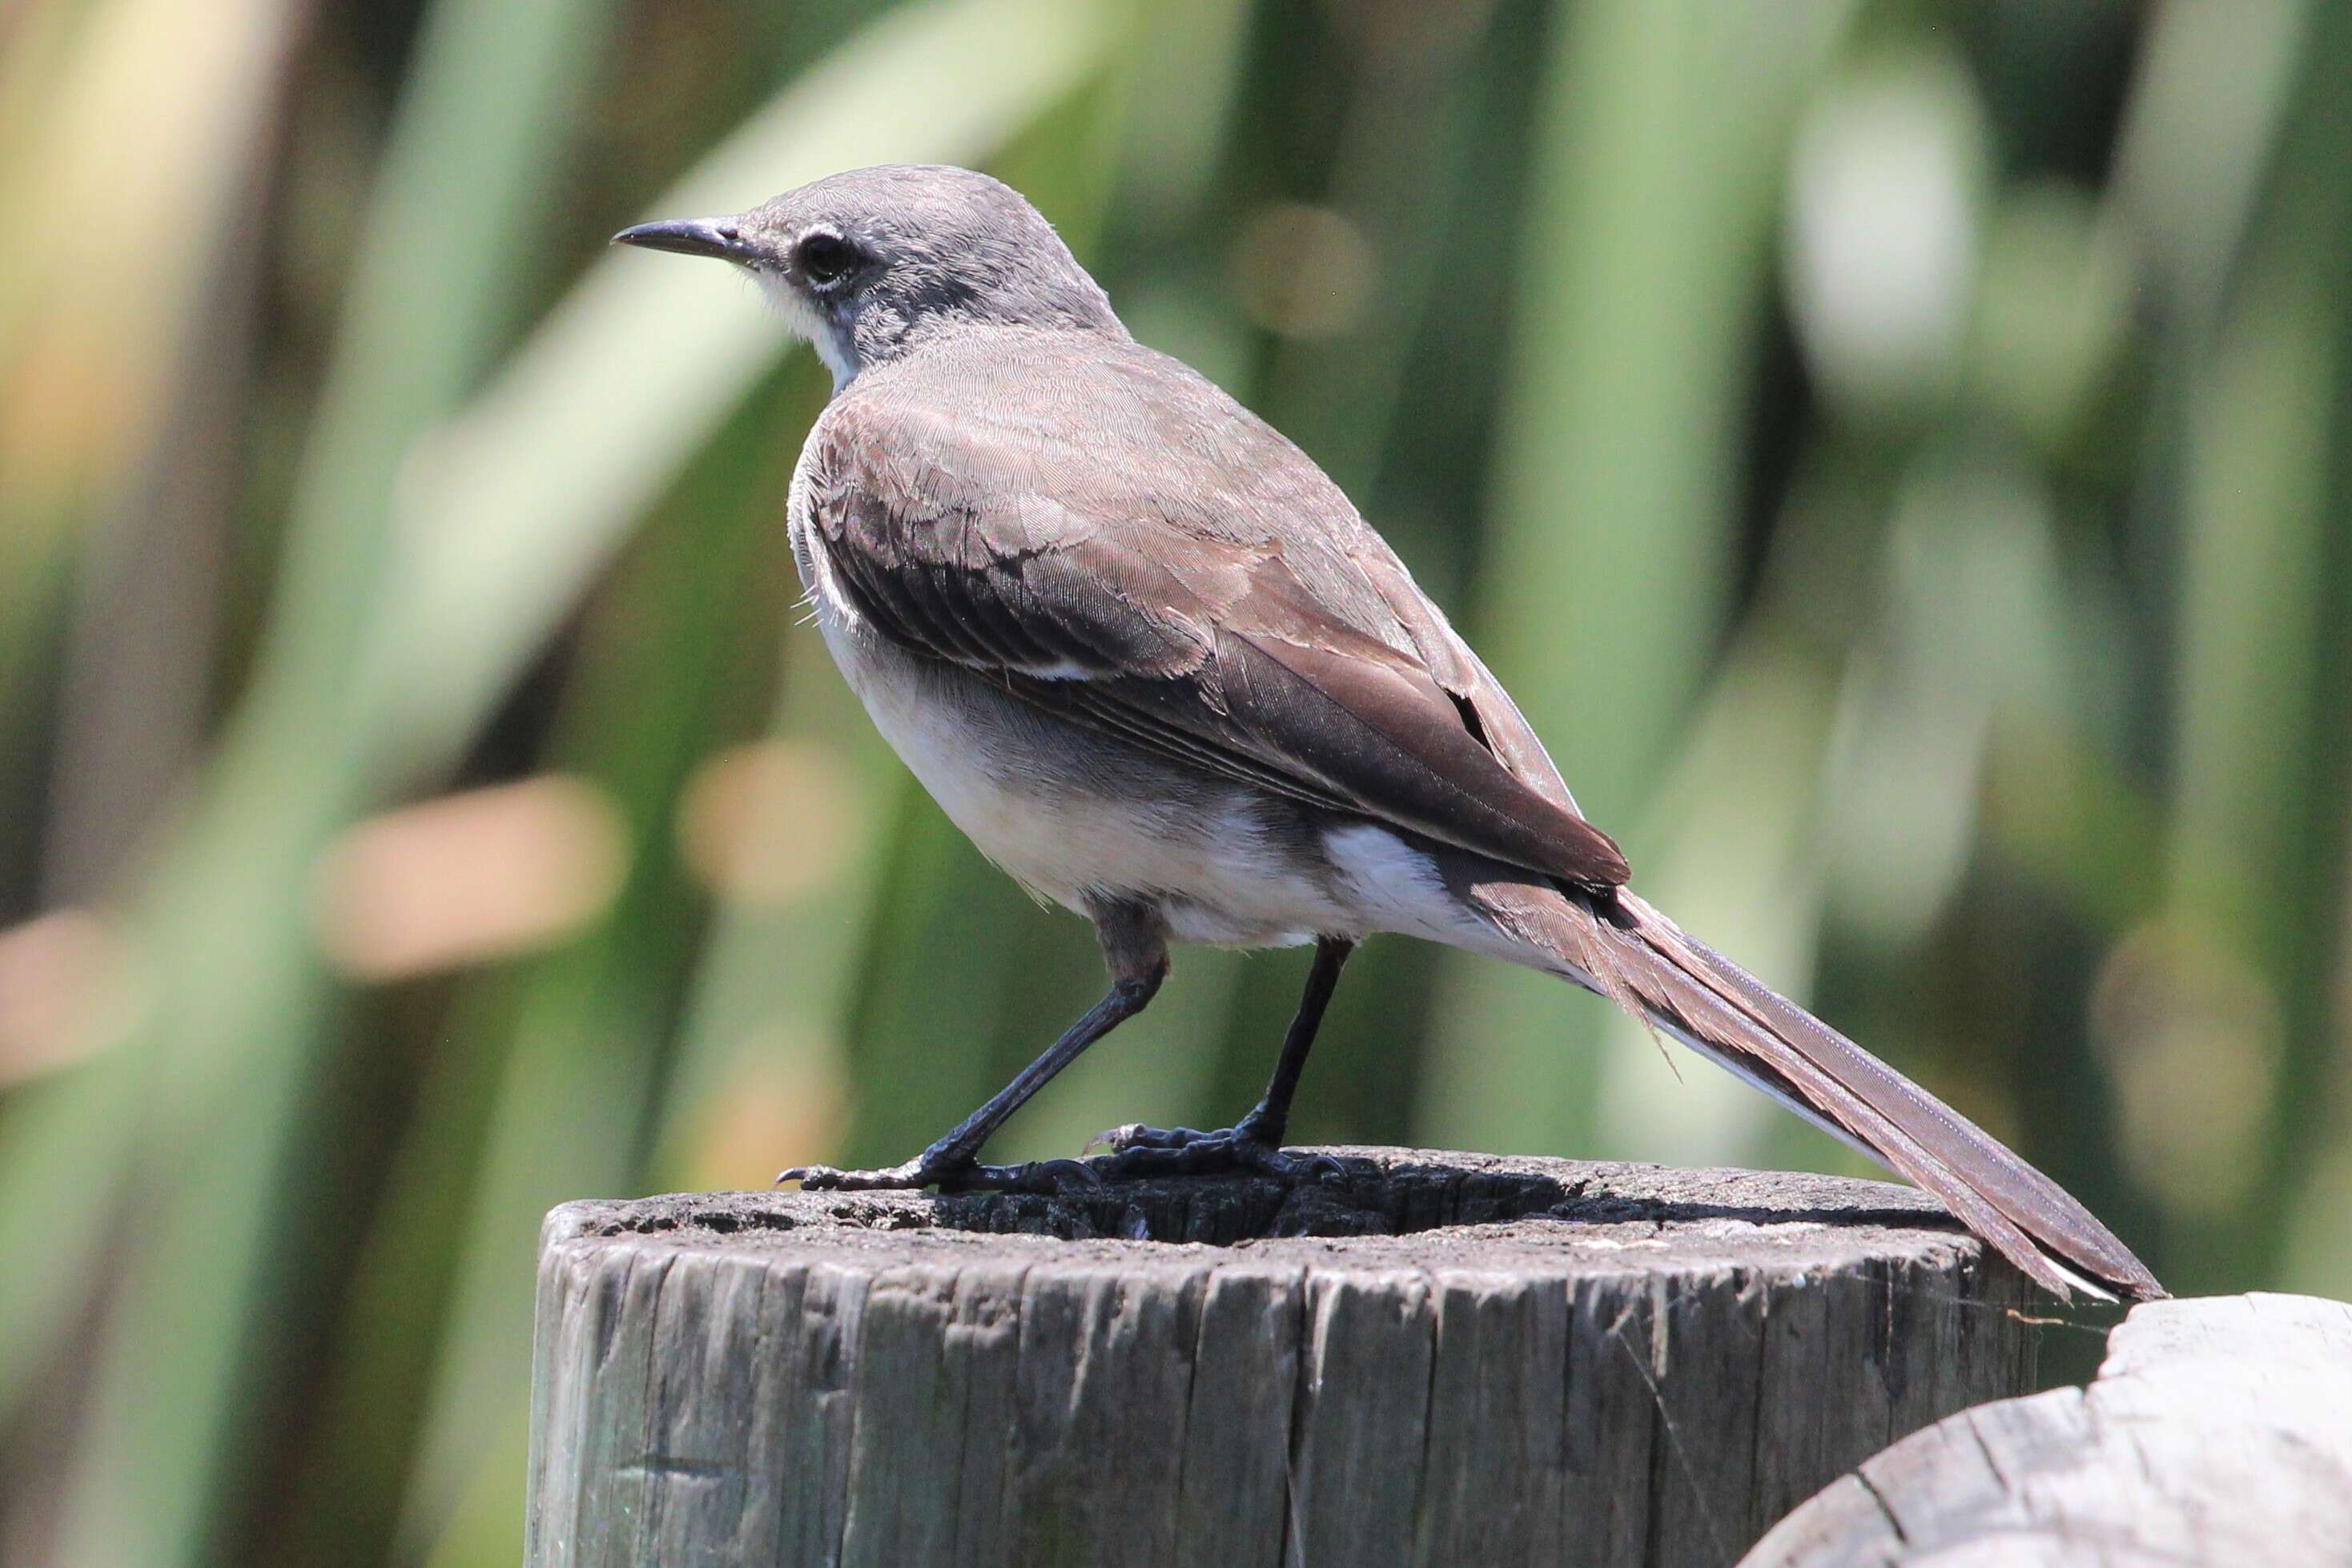 Image of Cape Wagtail